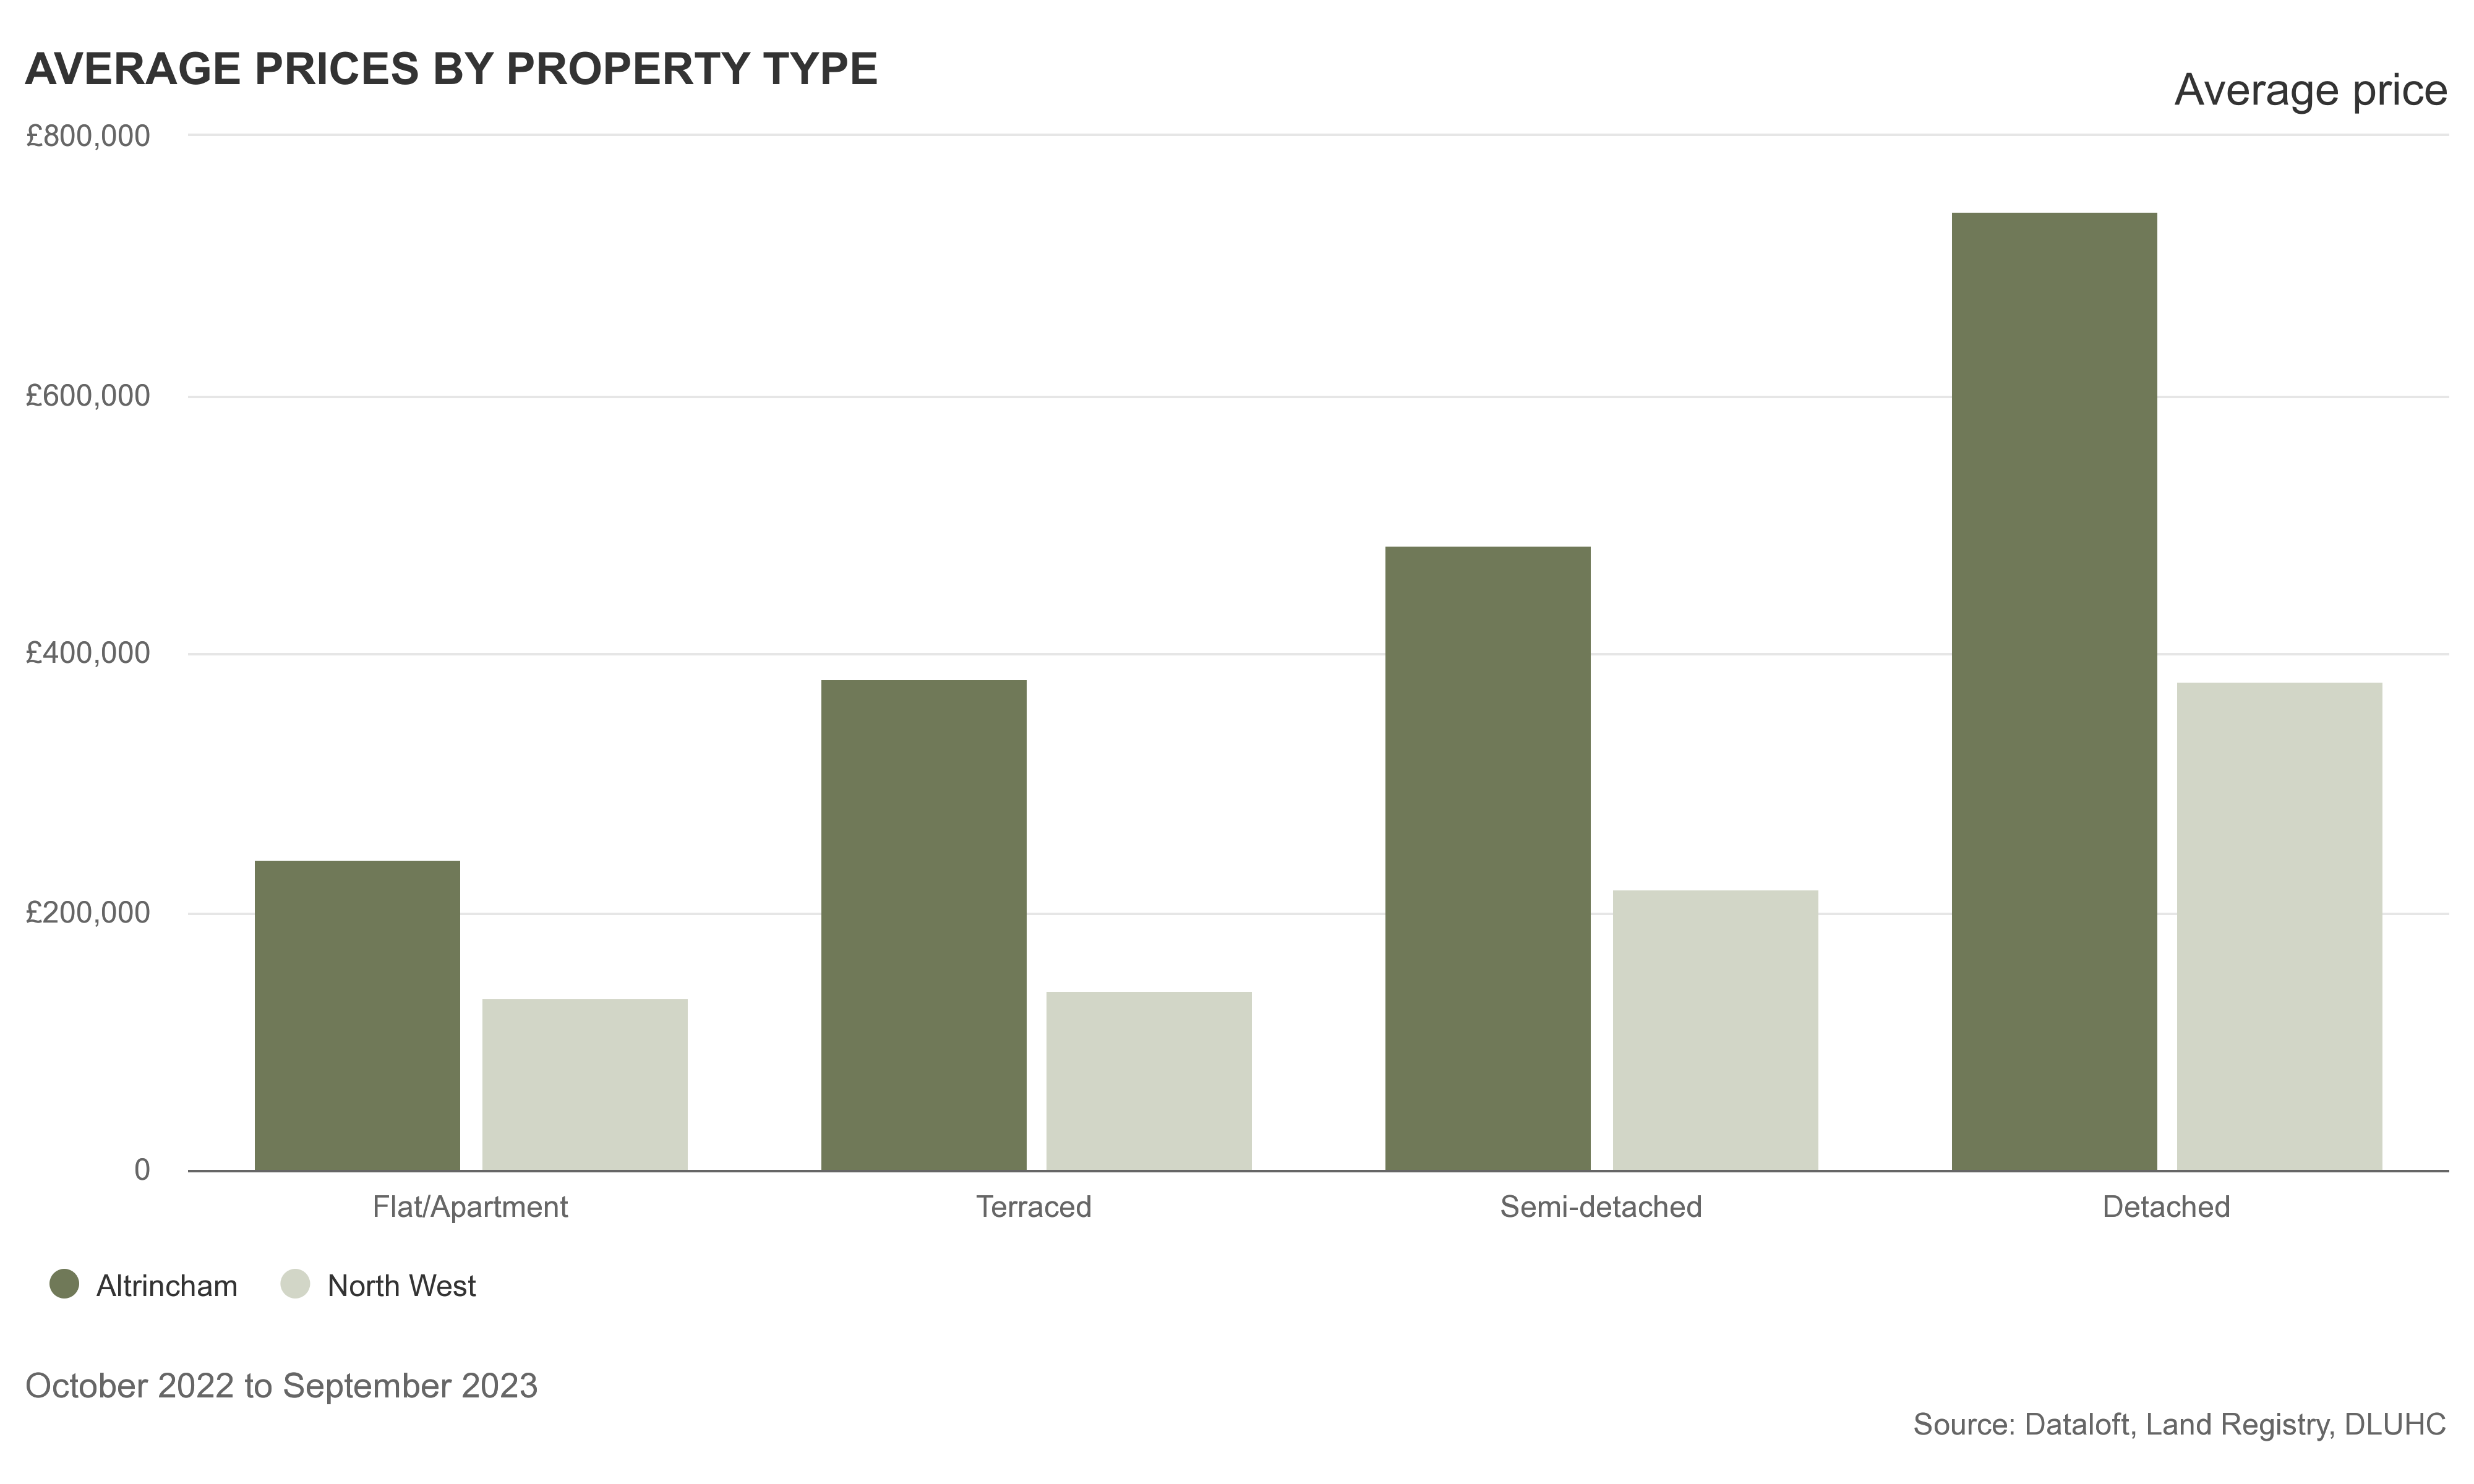 A chart showing the average property price by property type in Altrincham